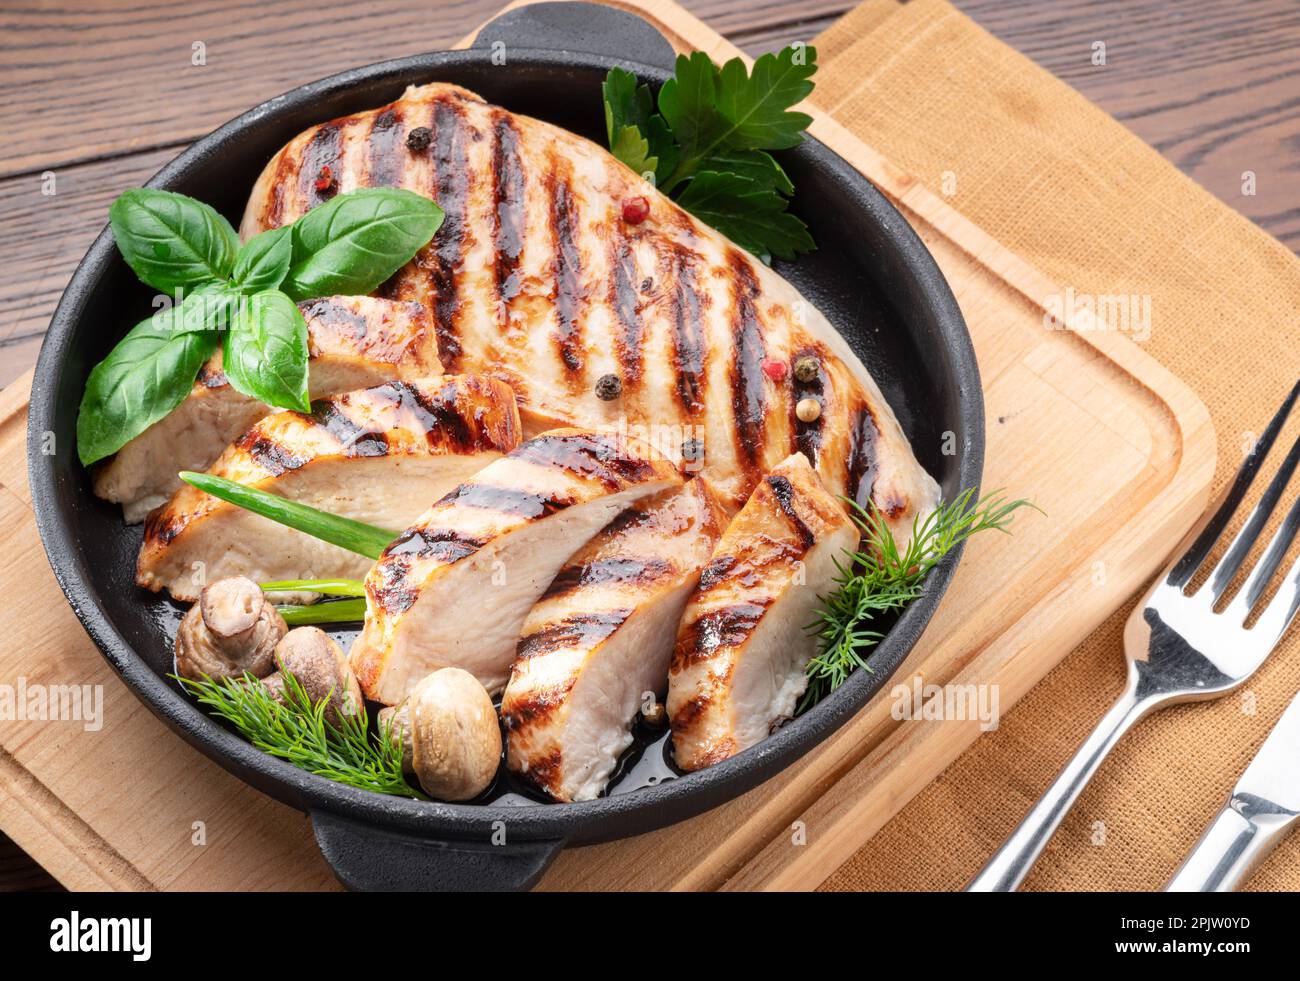 Roasted chicken fillet and mushrooms with herb in the frying pan on the wooden table close-up. Stock Photo